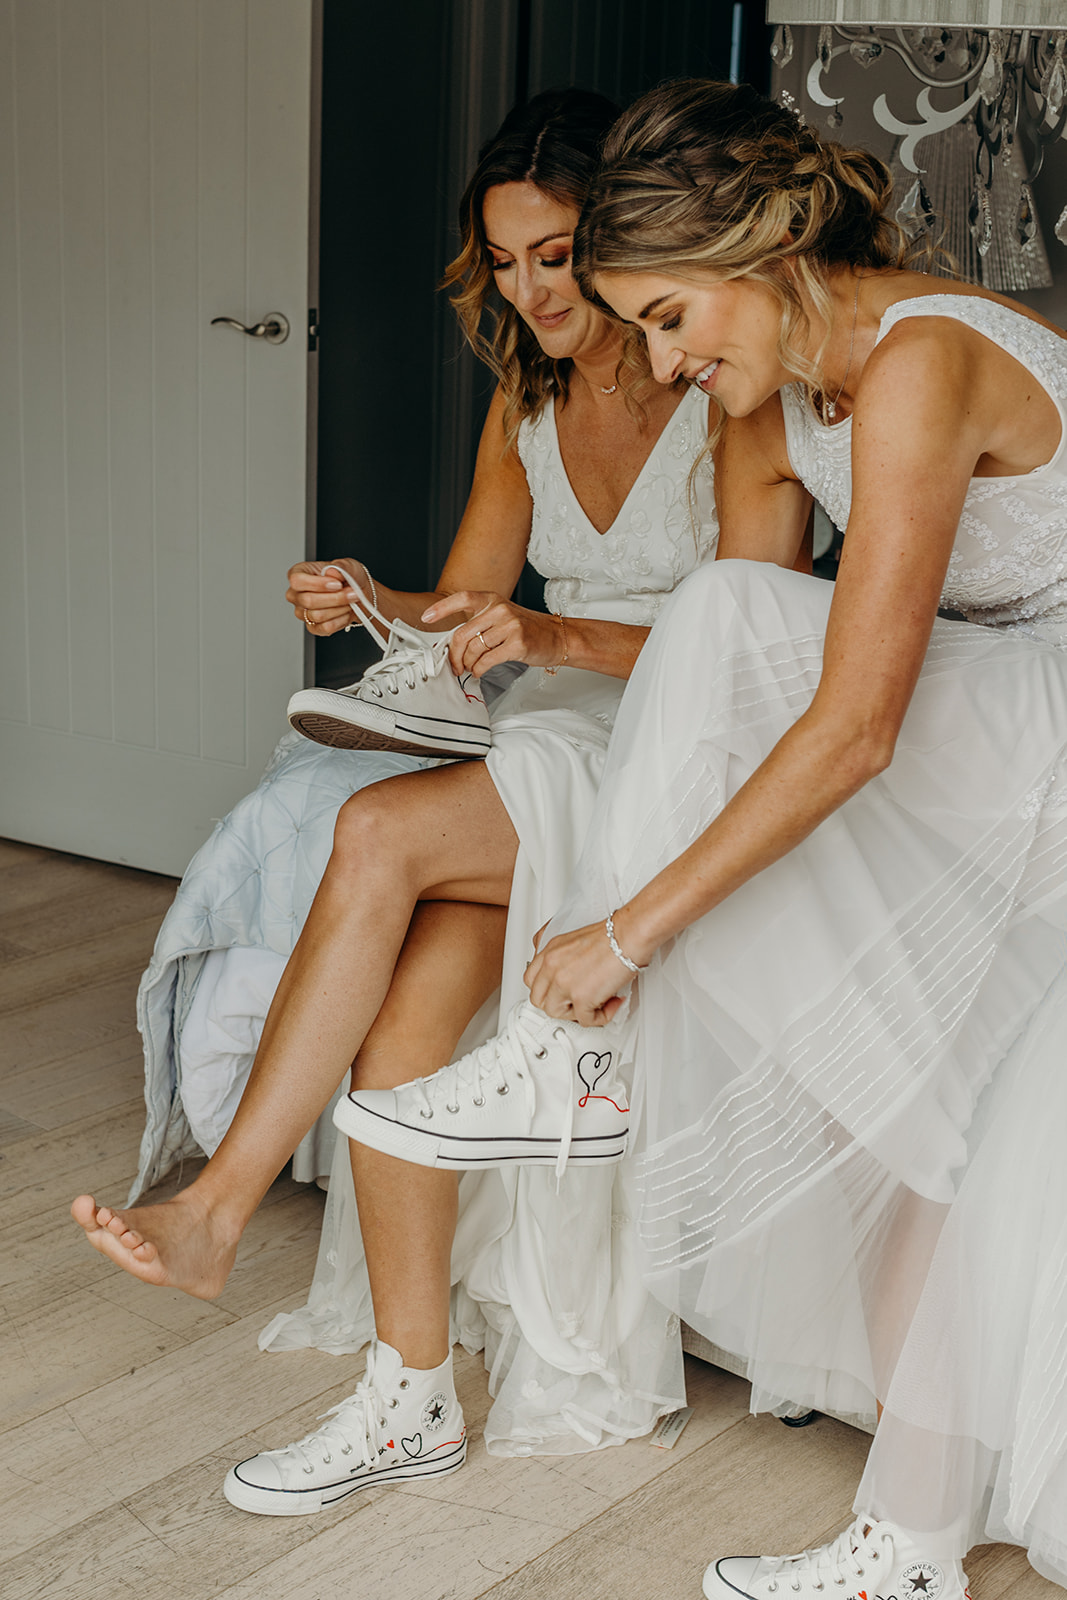 two white blonde brides in white wedding dresses sat on a bed putting on matching white converse trainers before getting married